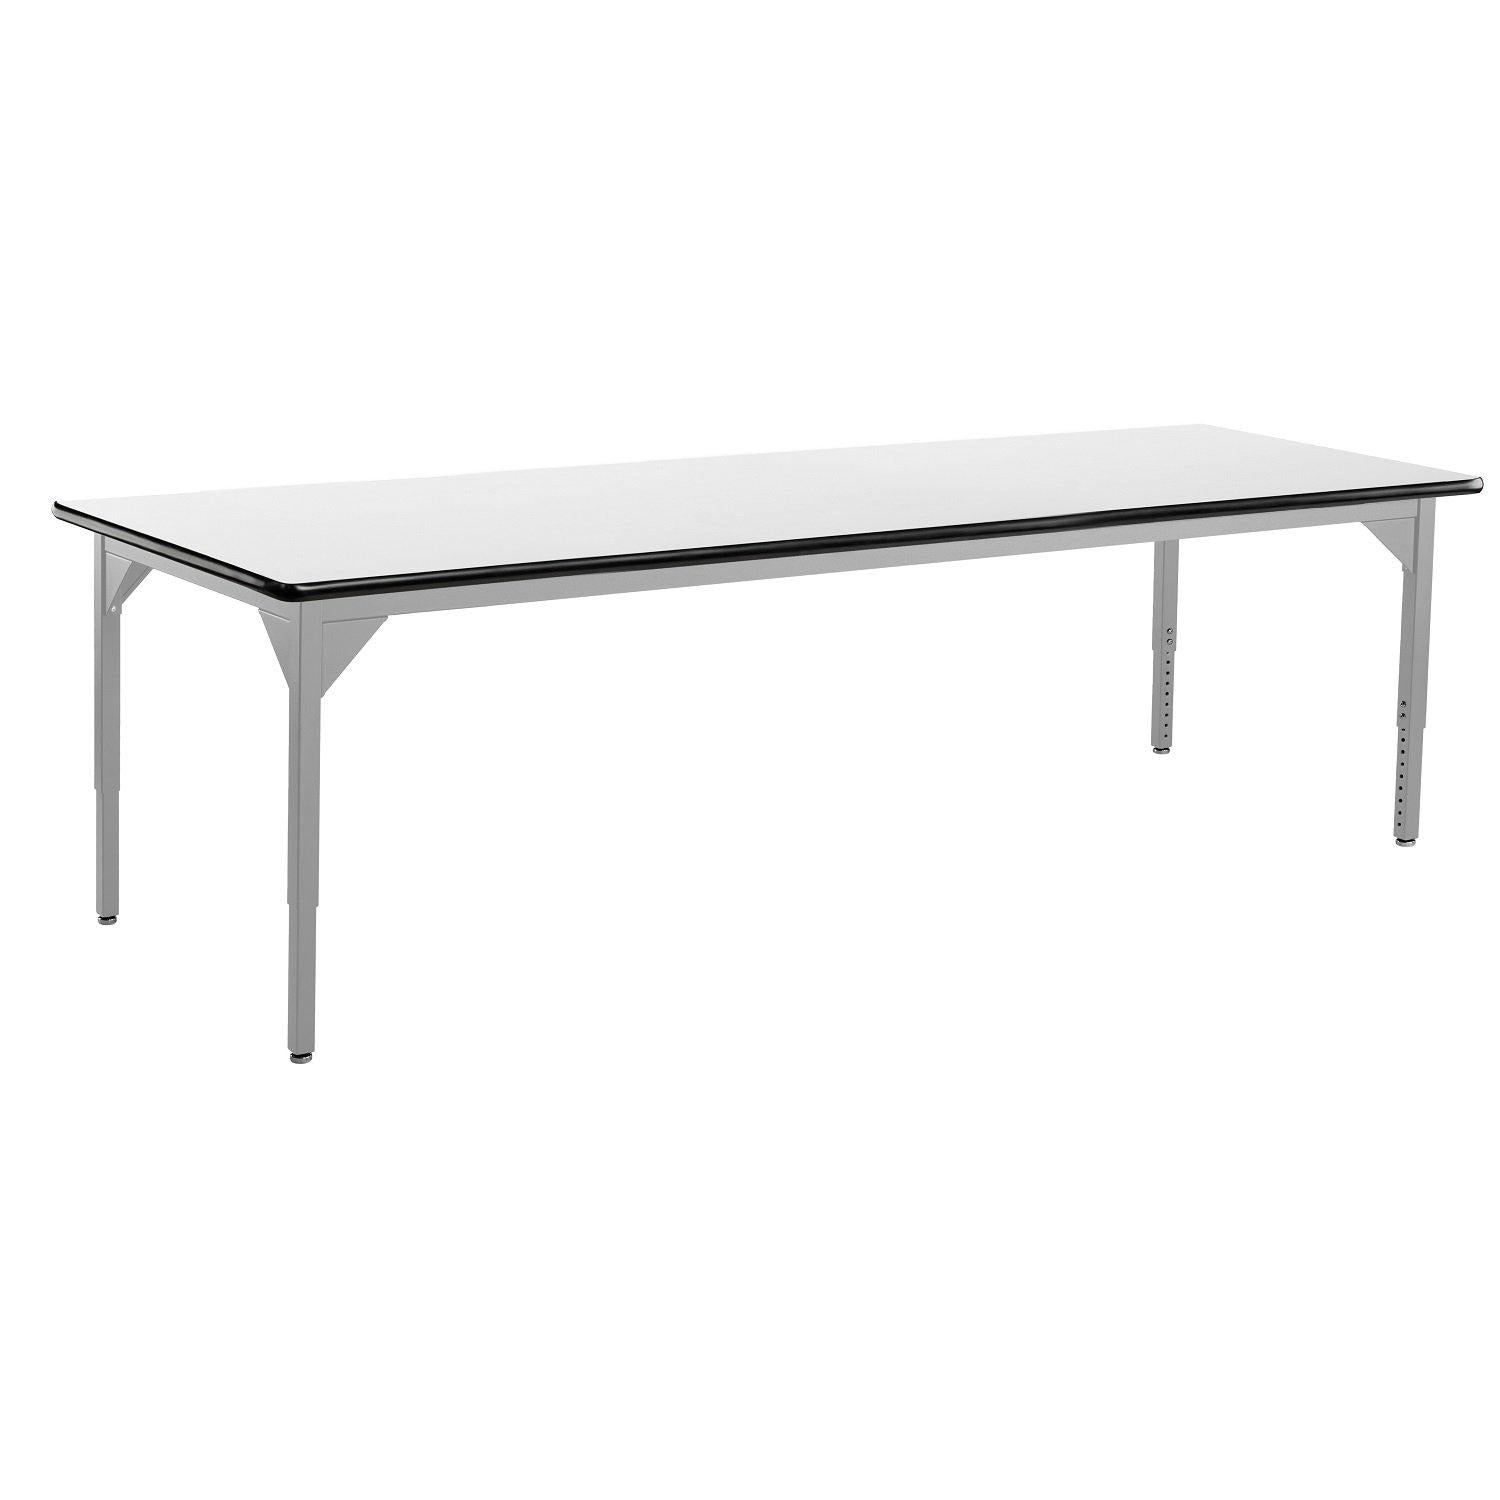 Heavy-Duty Height-Adjustable Utility Table, Soft Grey Frame, 36" x 96", Whiteboard High-Pressure Laminate Top